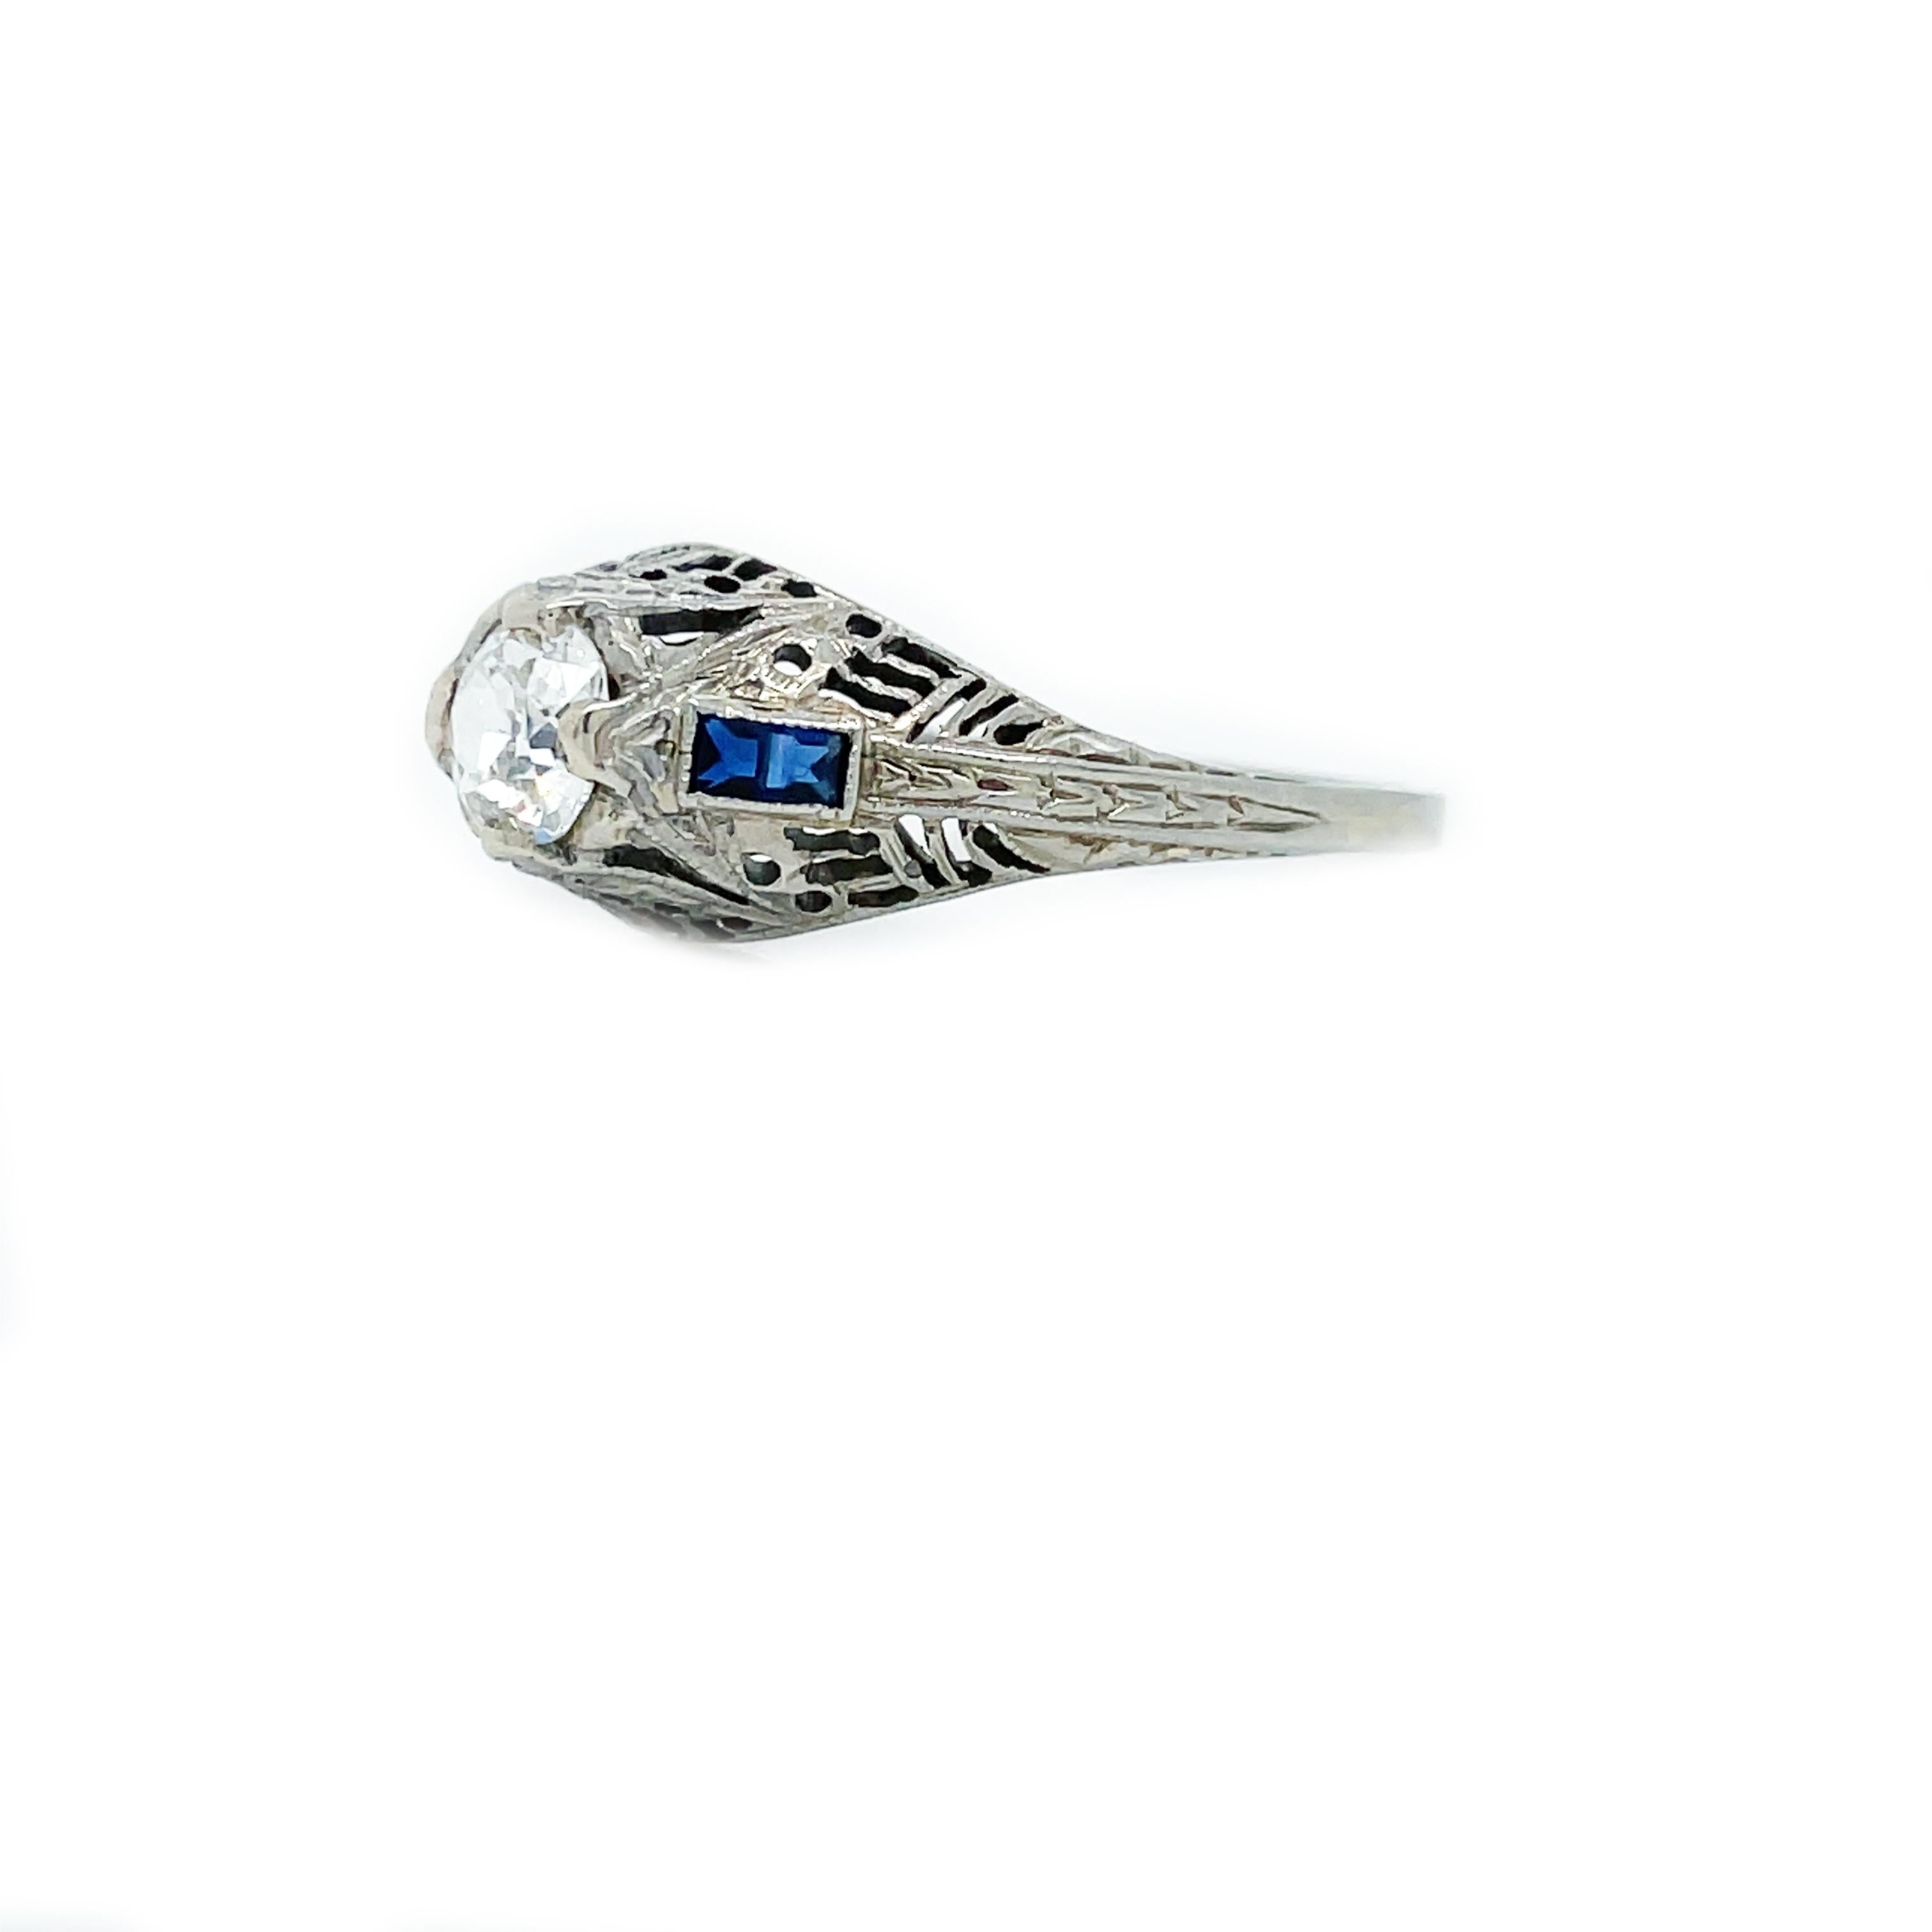 1915 Art Deco Diamond and Sapphire White Gold Filigree Ring with GIA Cert. 1